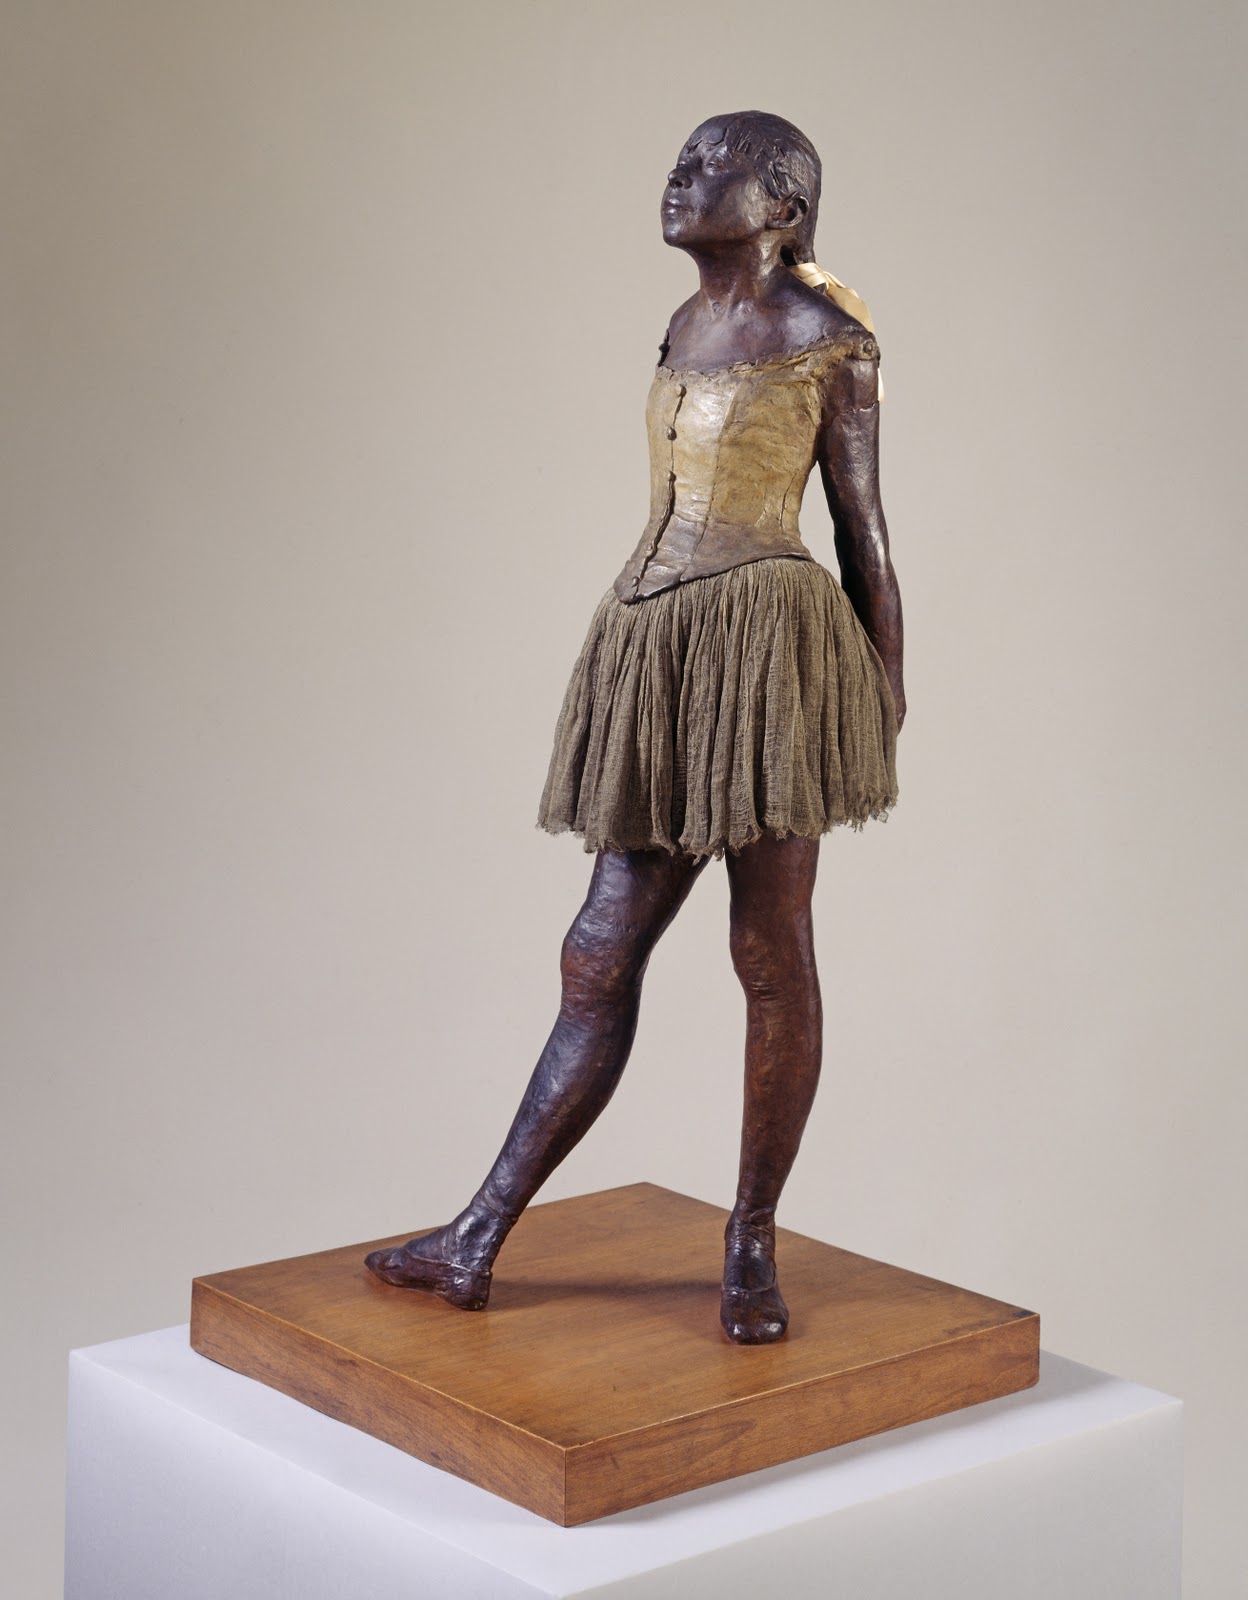 40 not so single: Review: Degas and the Ballet exhibition